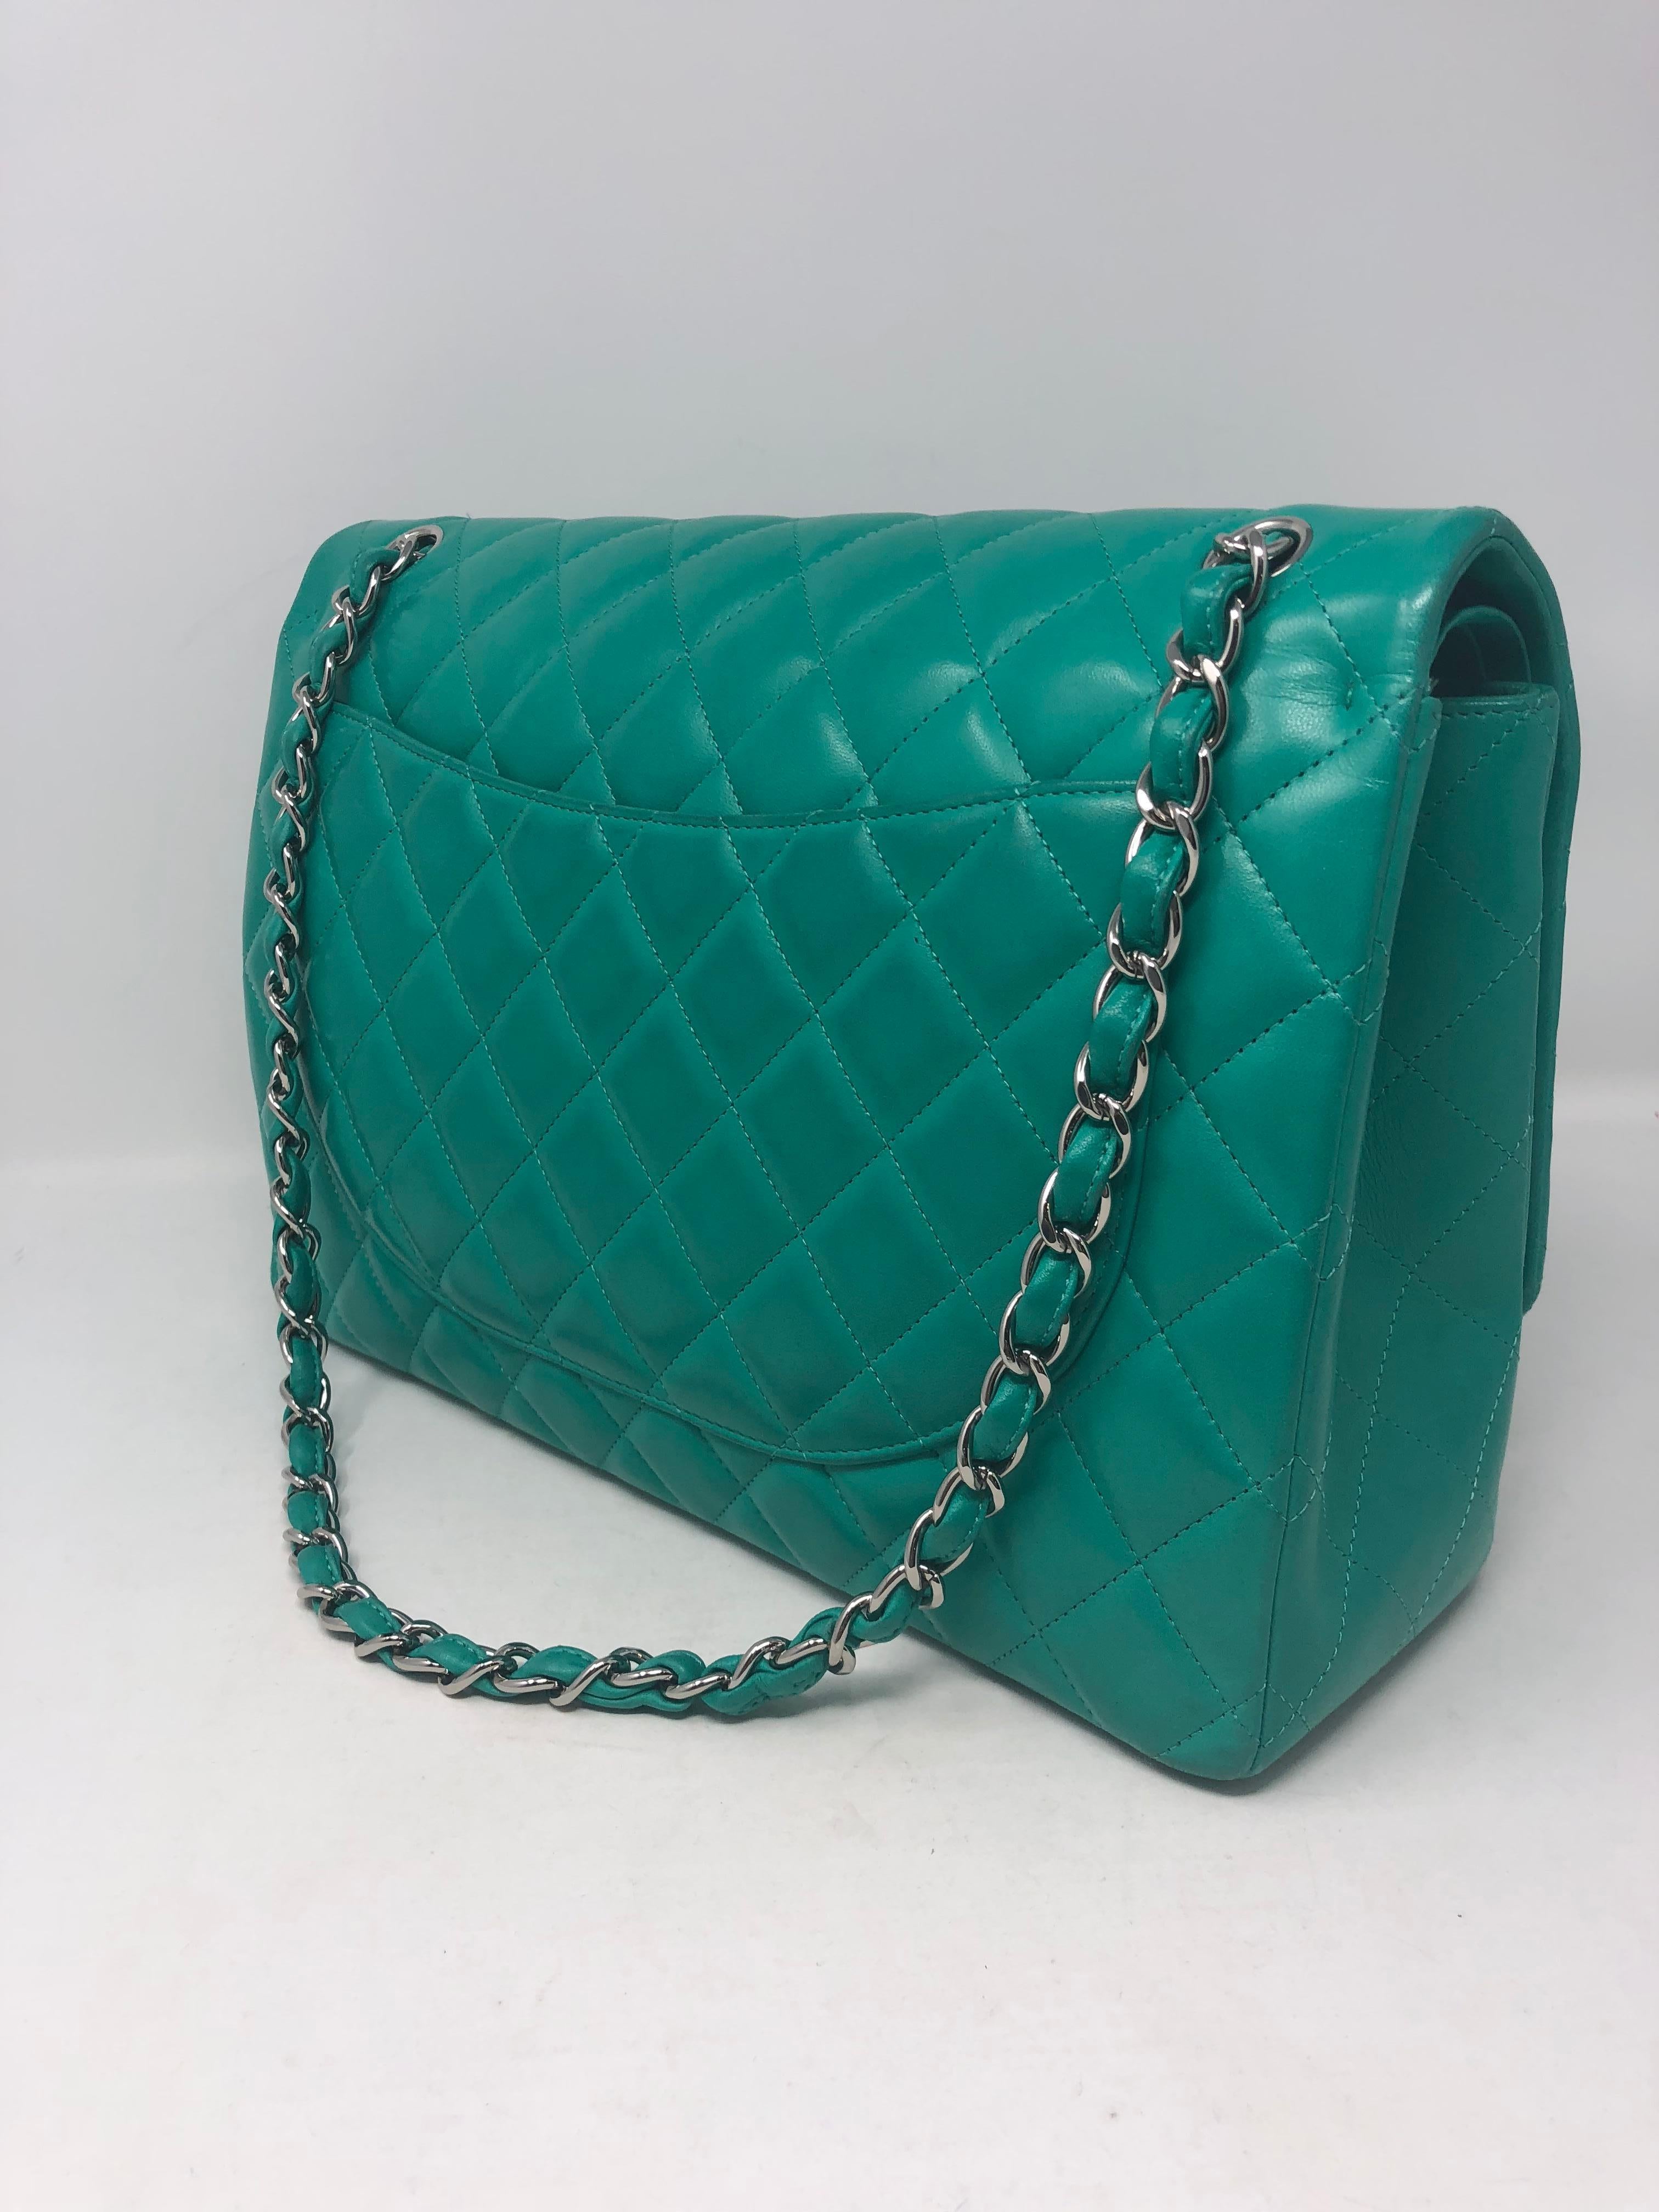 Chanel Menthe Green Leather Maxi Bag  2